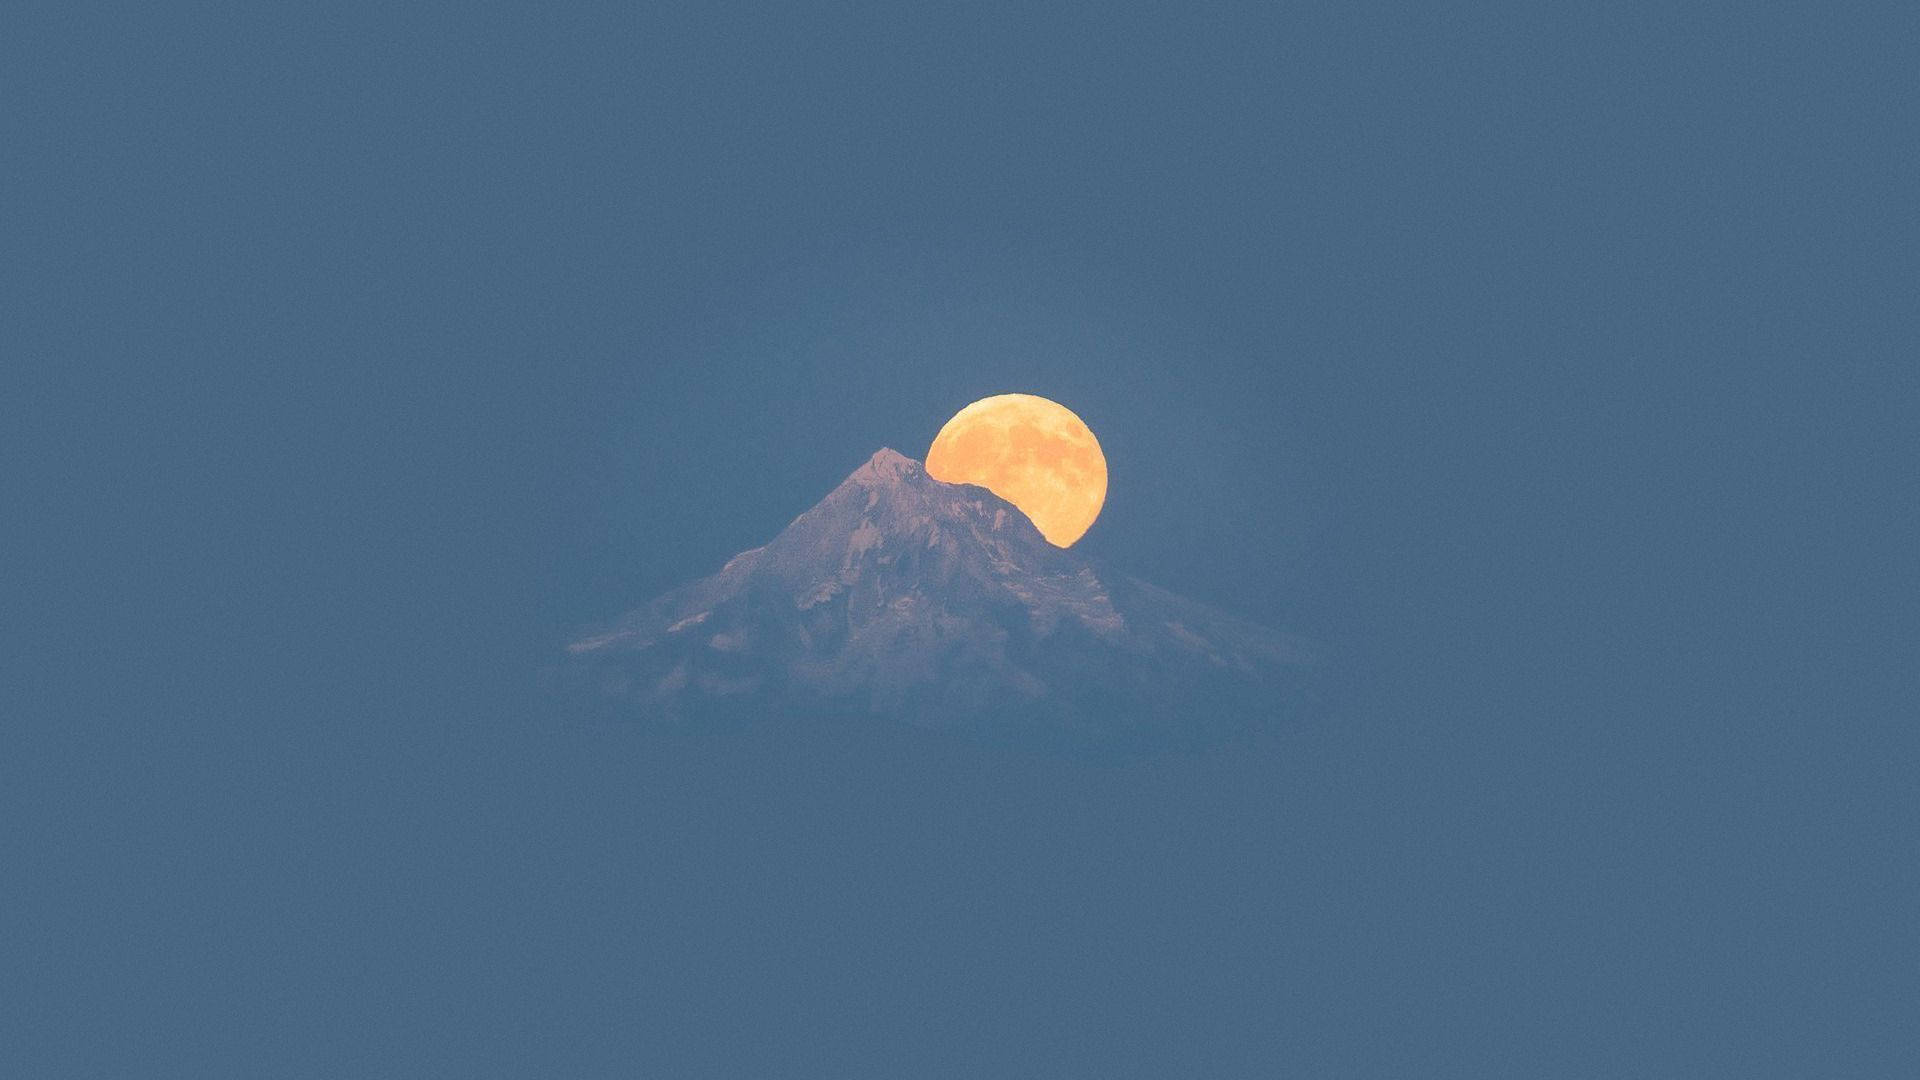 A full moon is rising over the top of mountains - Moon